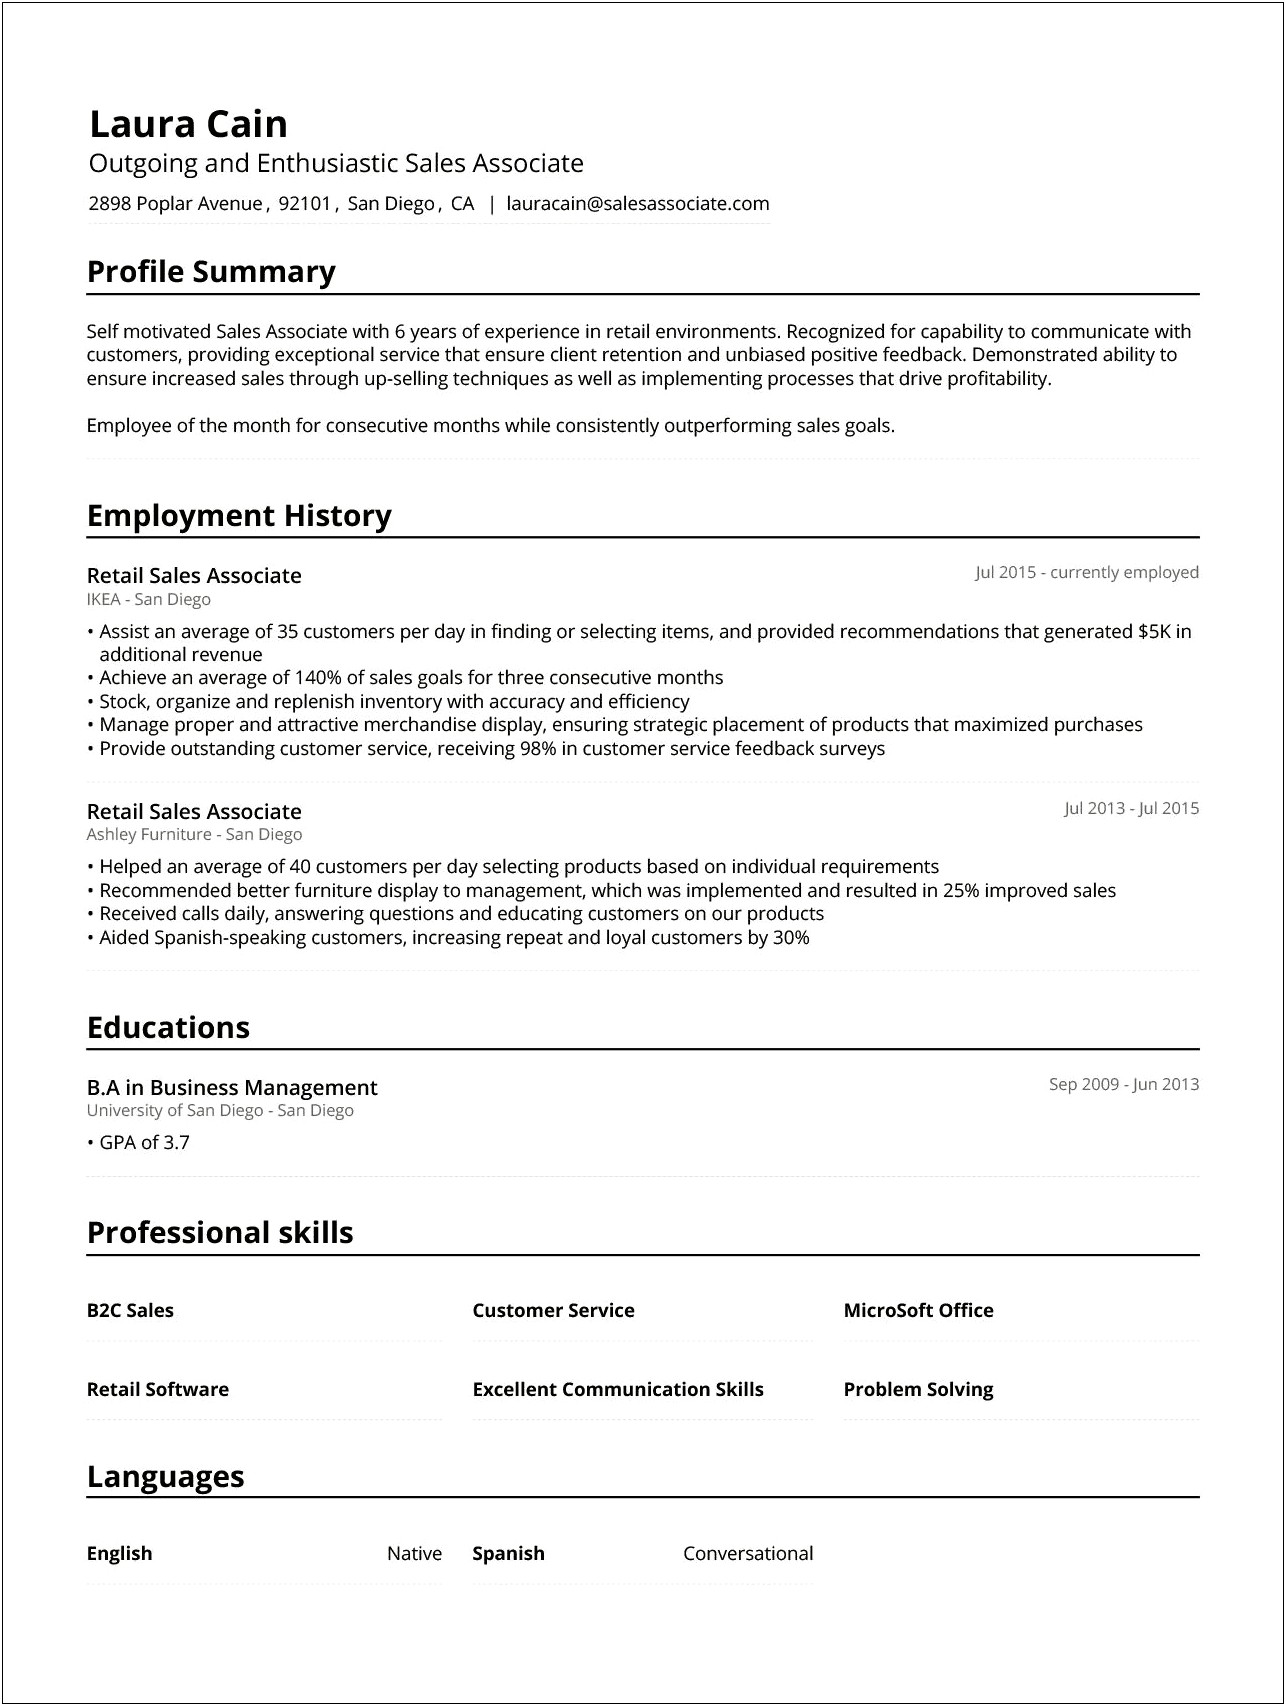 Resume Skills And Abilities Examples Sales